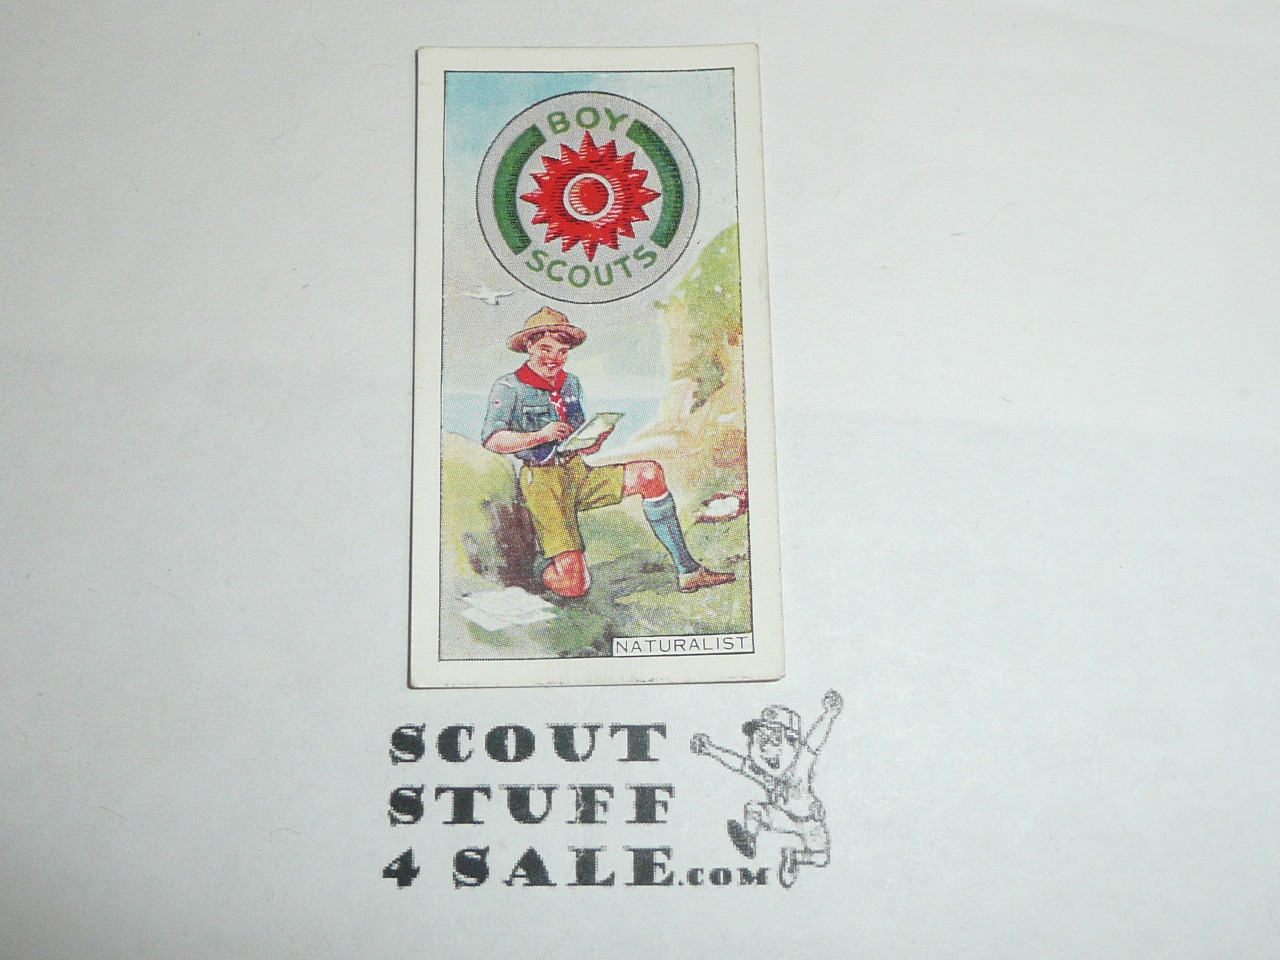 CWS Cigarette Company Premium Card, Boy Scout Badges Series of 50, Card #30 Naturalist, 1939